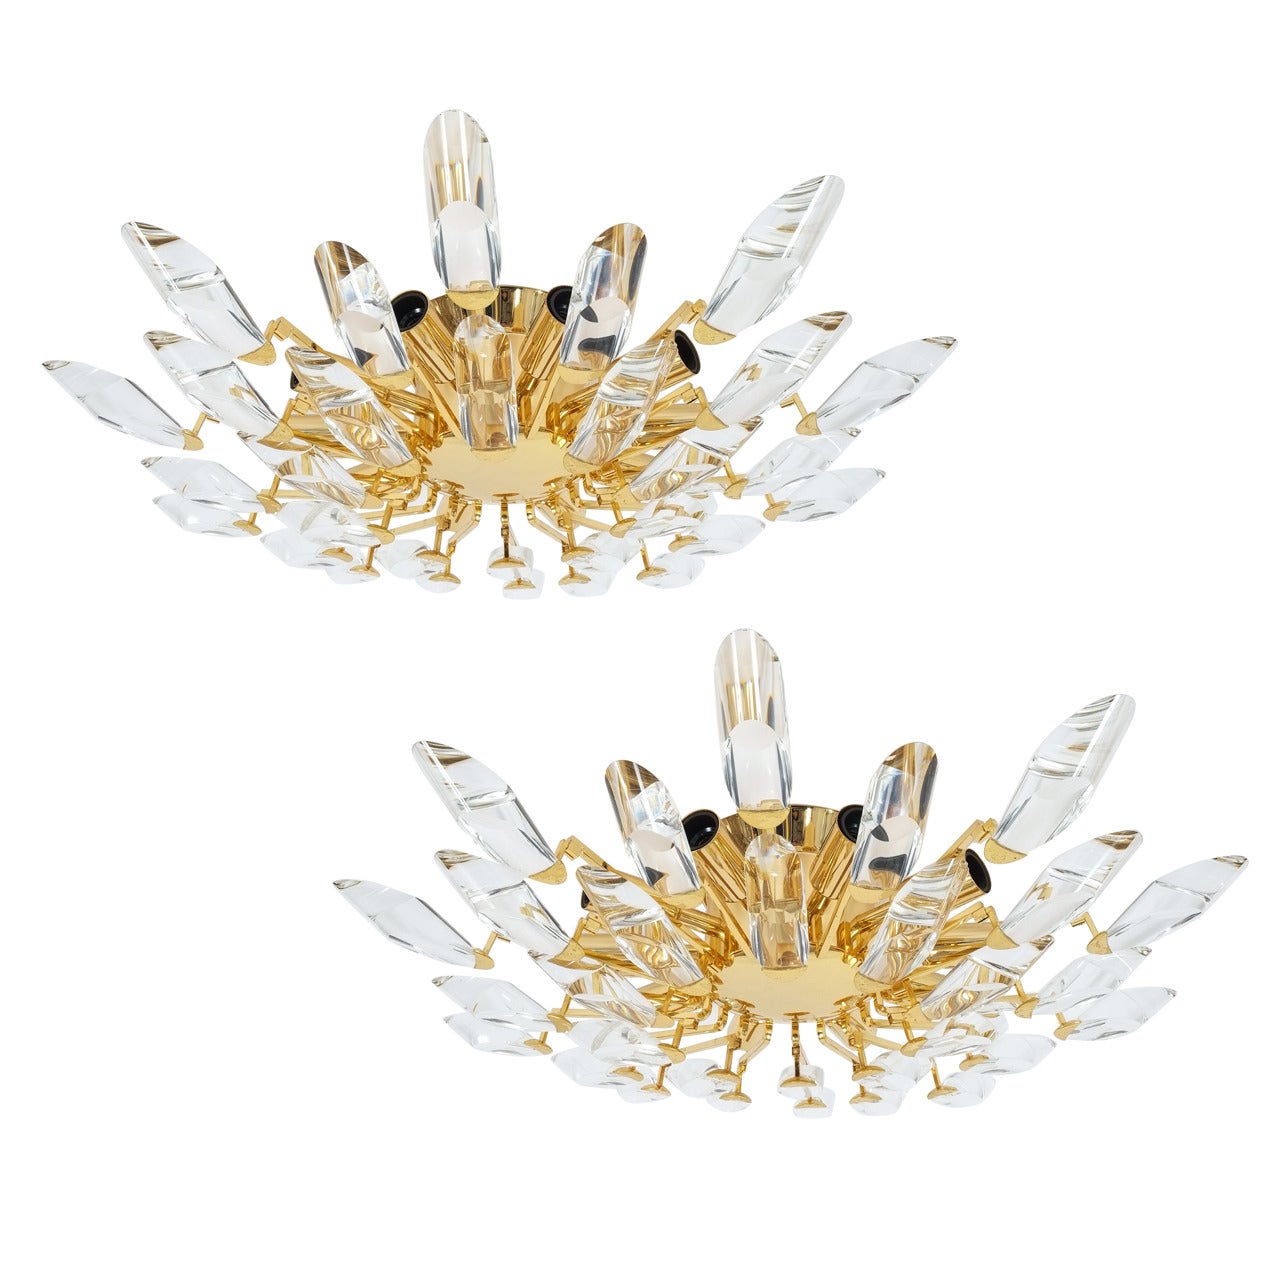 Gorgeous set of five identical italian crystal flush mounts.(24 inches in diameter) Gold plated brass branches and unique geometrical crystals. These fixtures hold 10 bulbs each and are all in excellent condition (it has been professionally cleaned